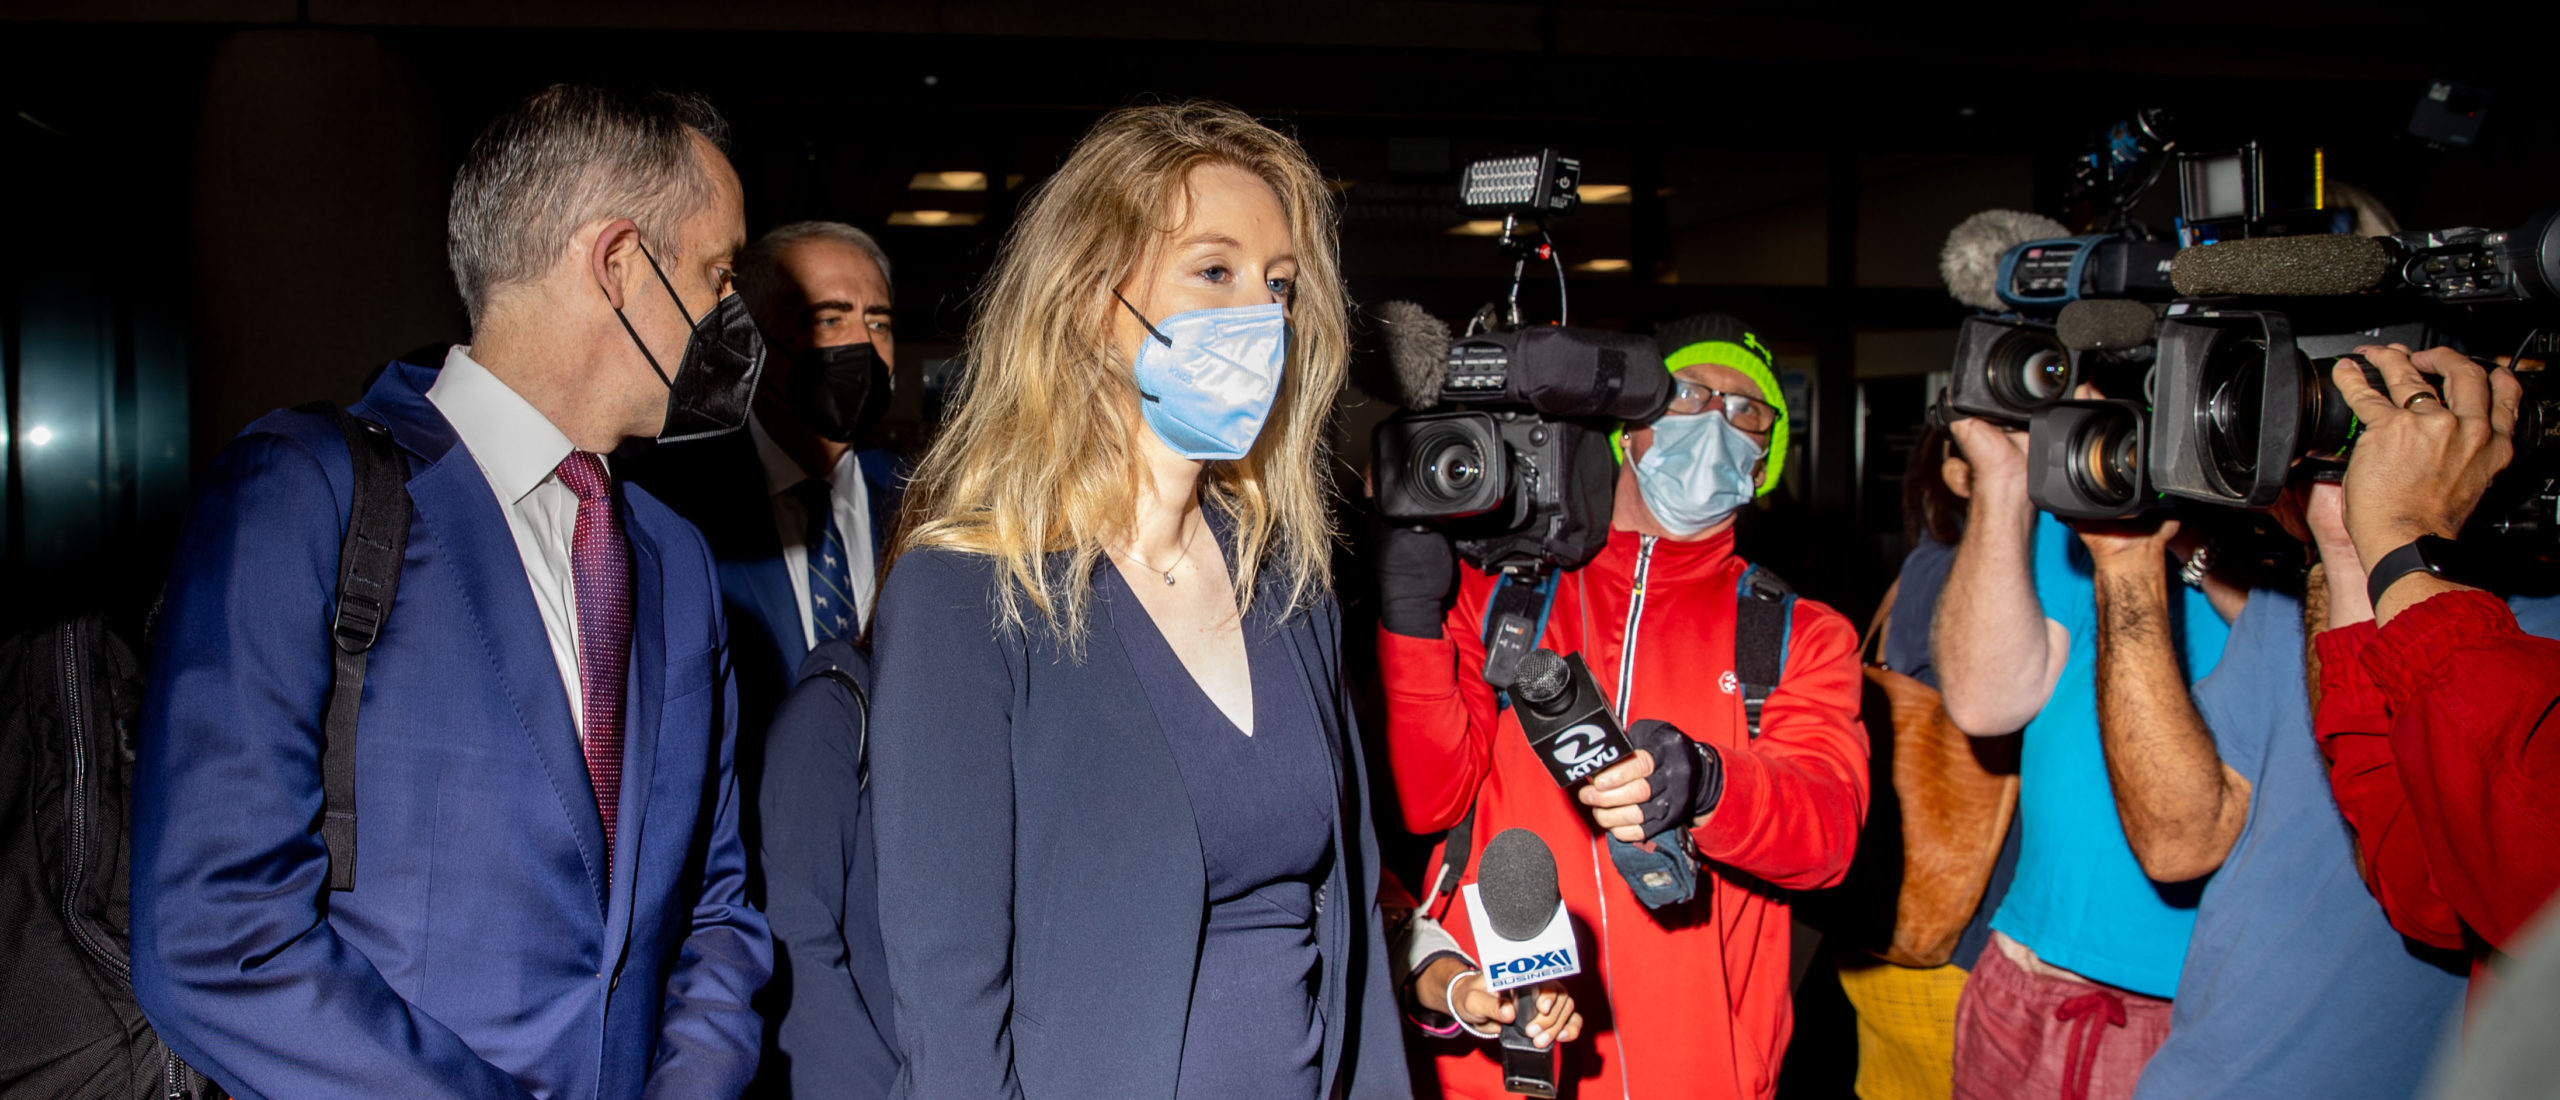 Theranos founder Elizabeth Holmes enters the Robert F. Peckham Federal Building with her defense team on August 31, 2021 in San Jose, California. (Photo by Ethan Swope/Getty Images)